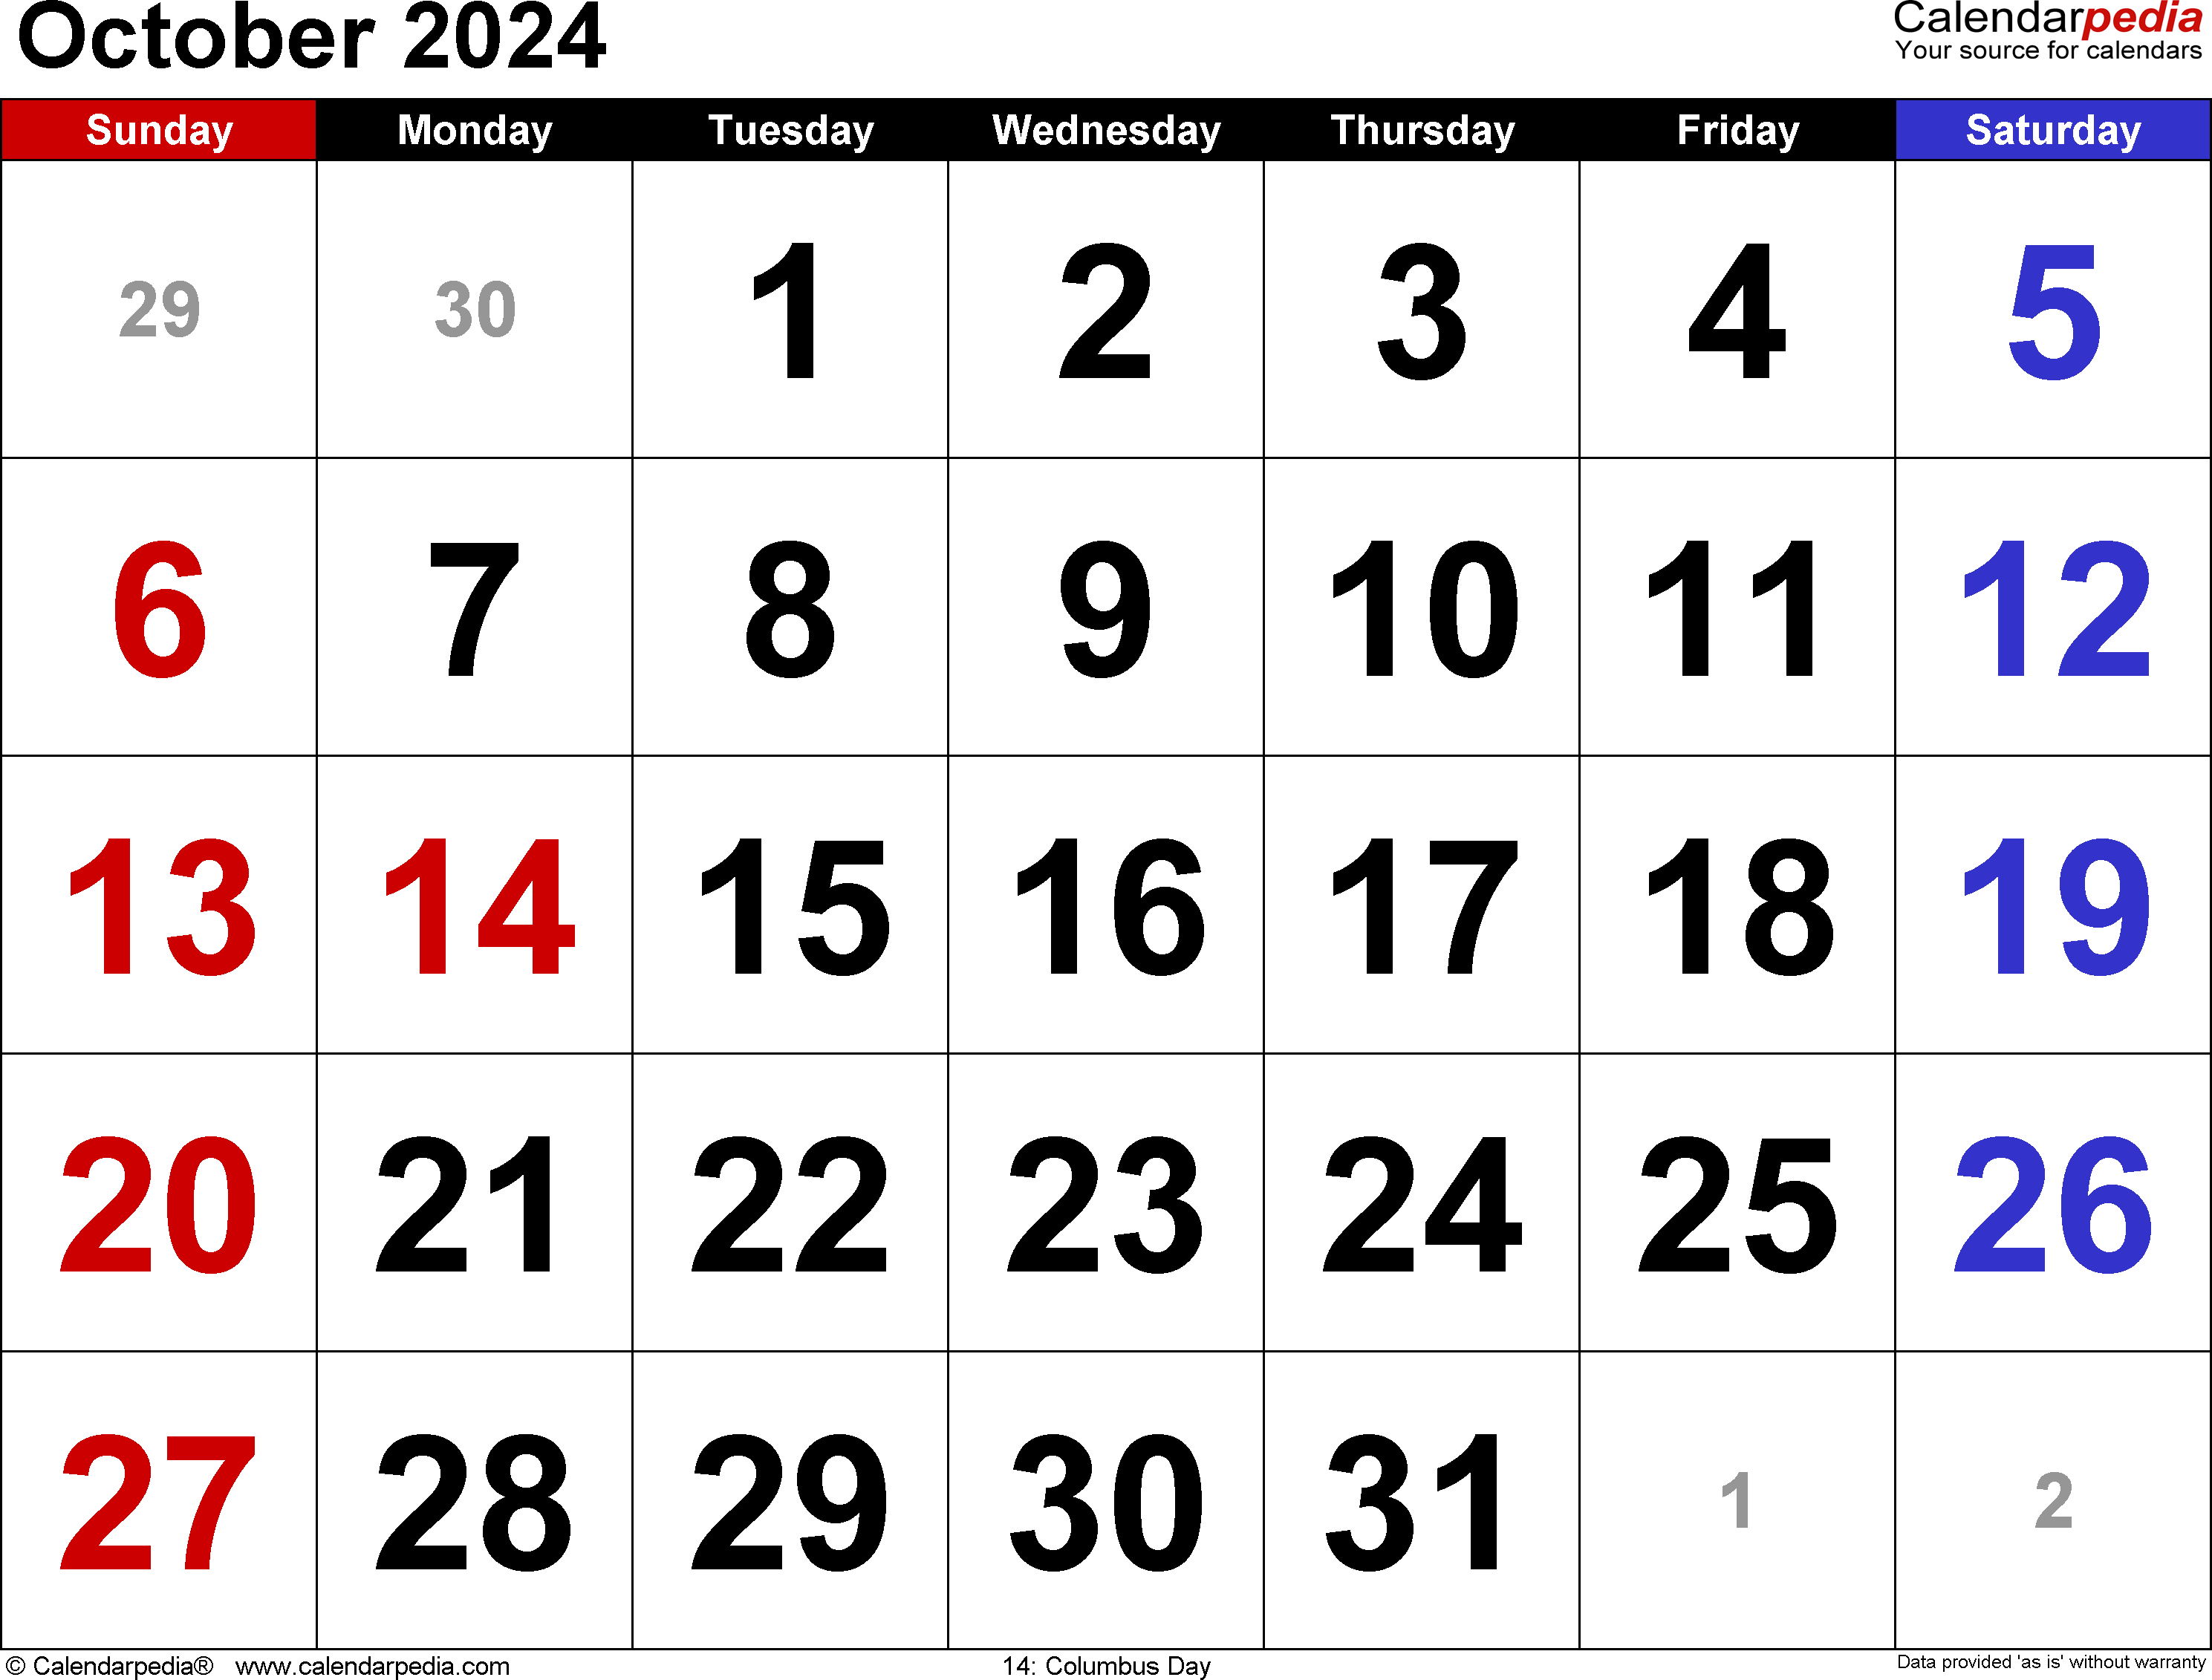 October 2024 Calendar | Templates For Word, Excel And Pdf for Printable Calendar 2024 October